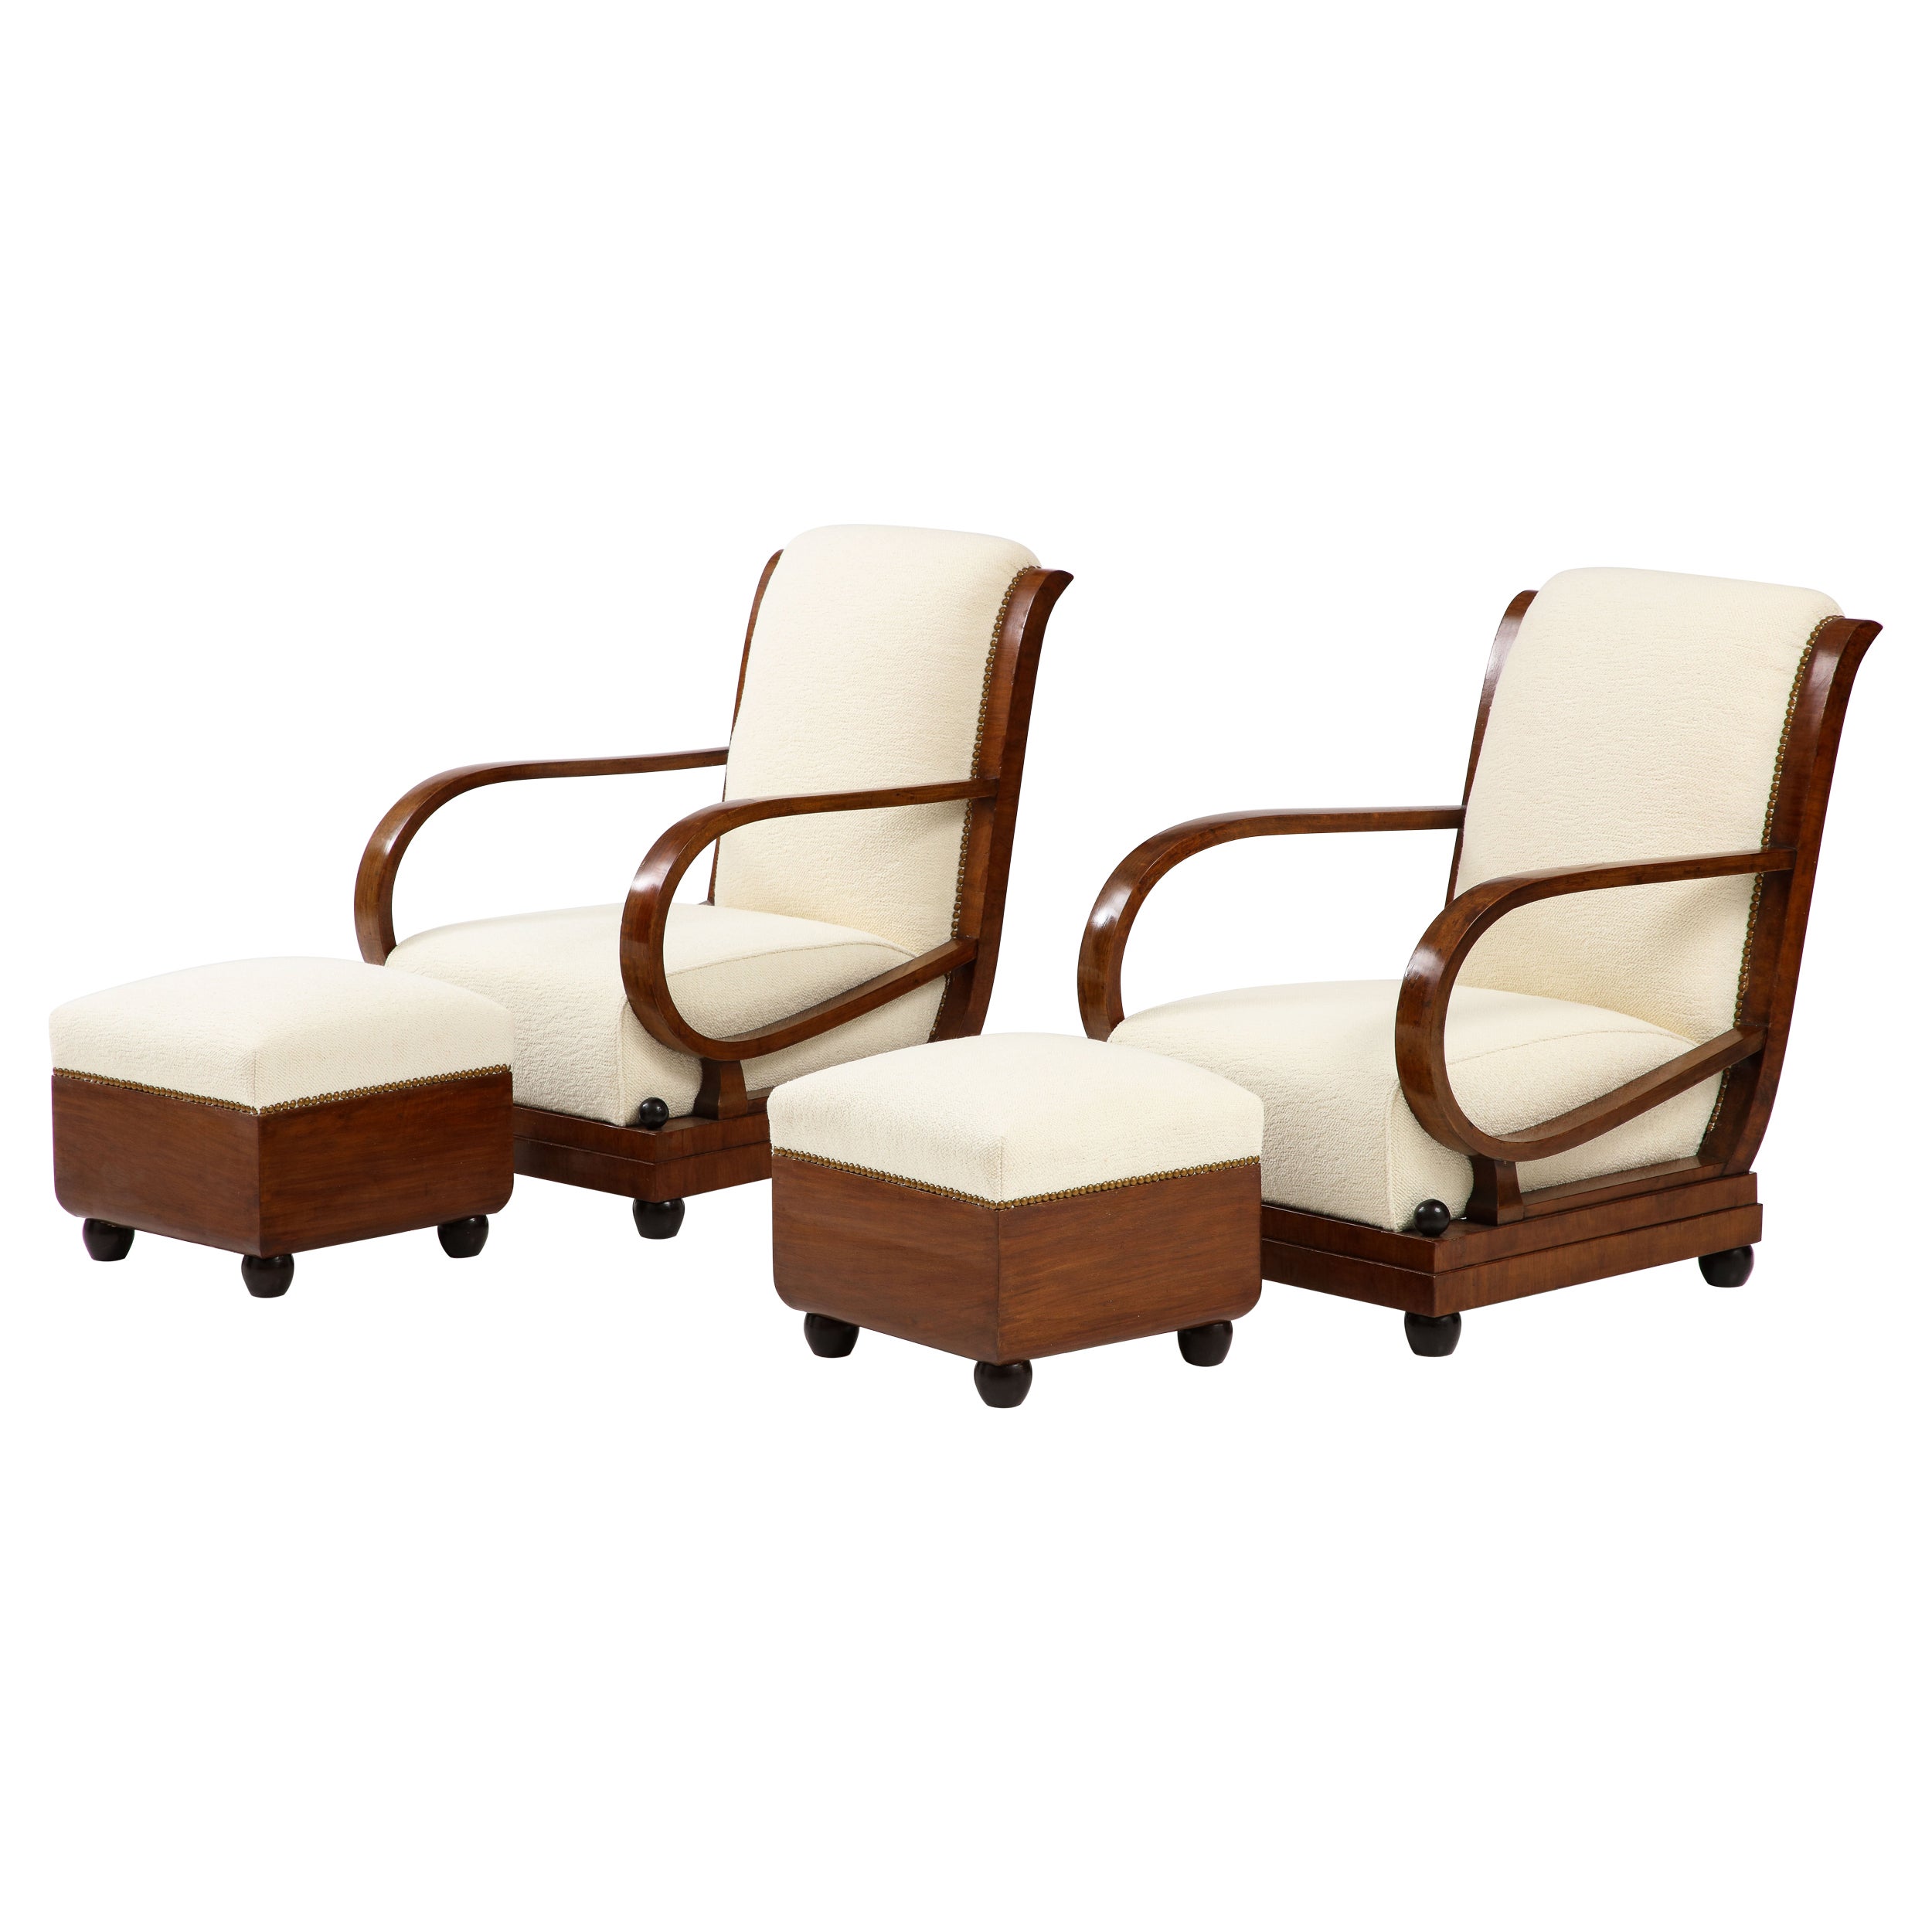 Italian 1920's Walnut Armchairs / Lounge Chairs with Foot Stools